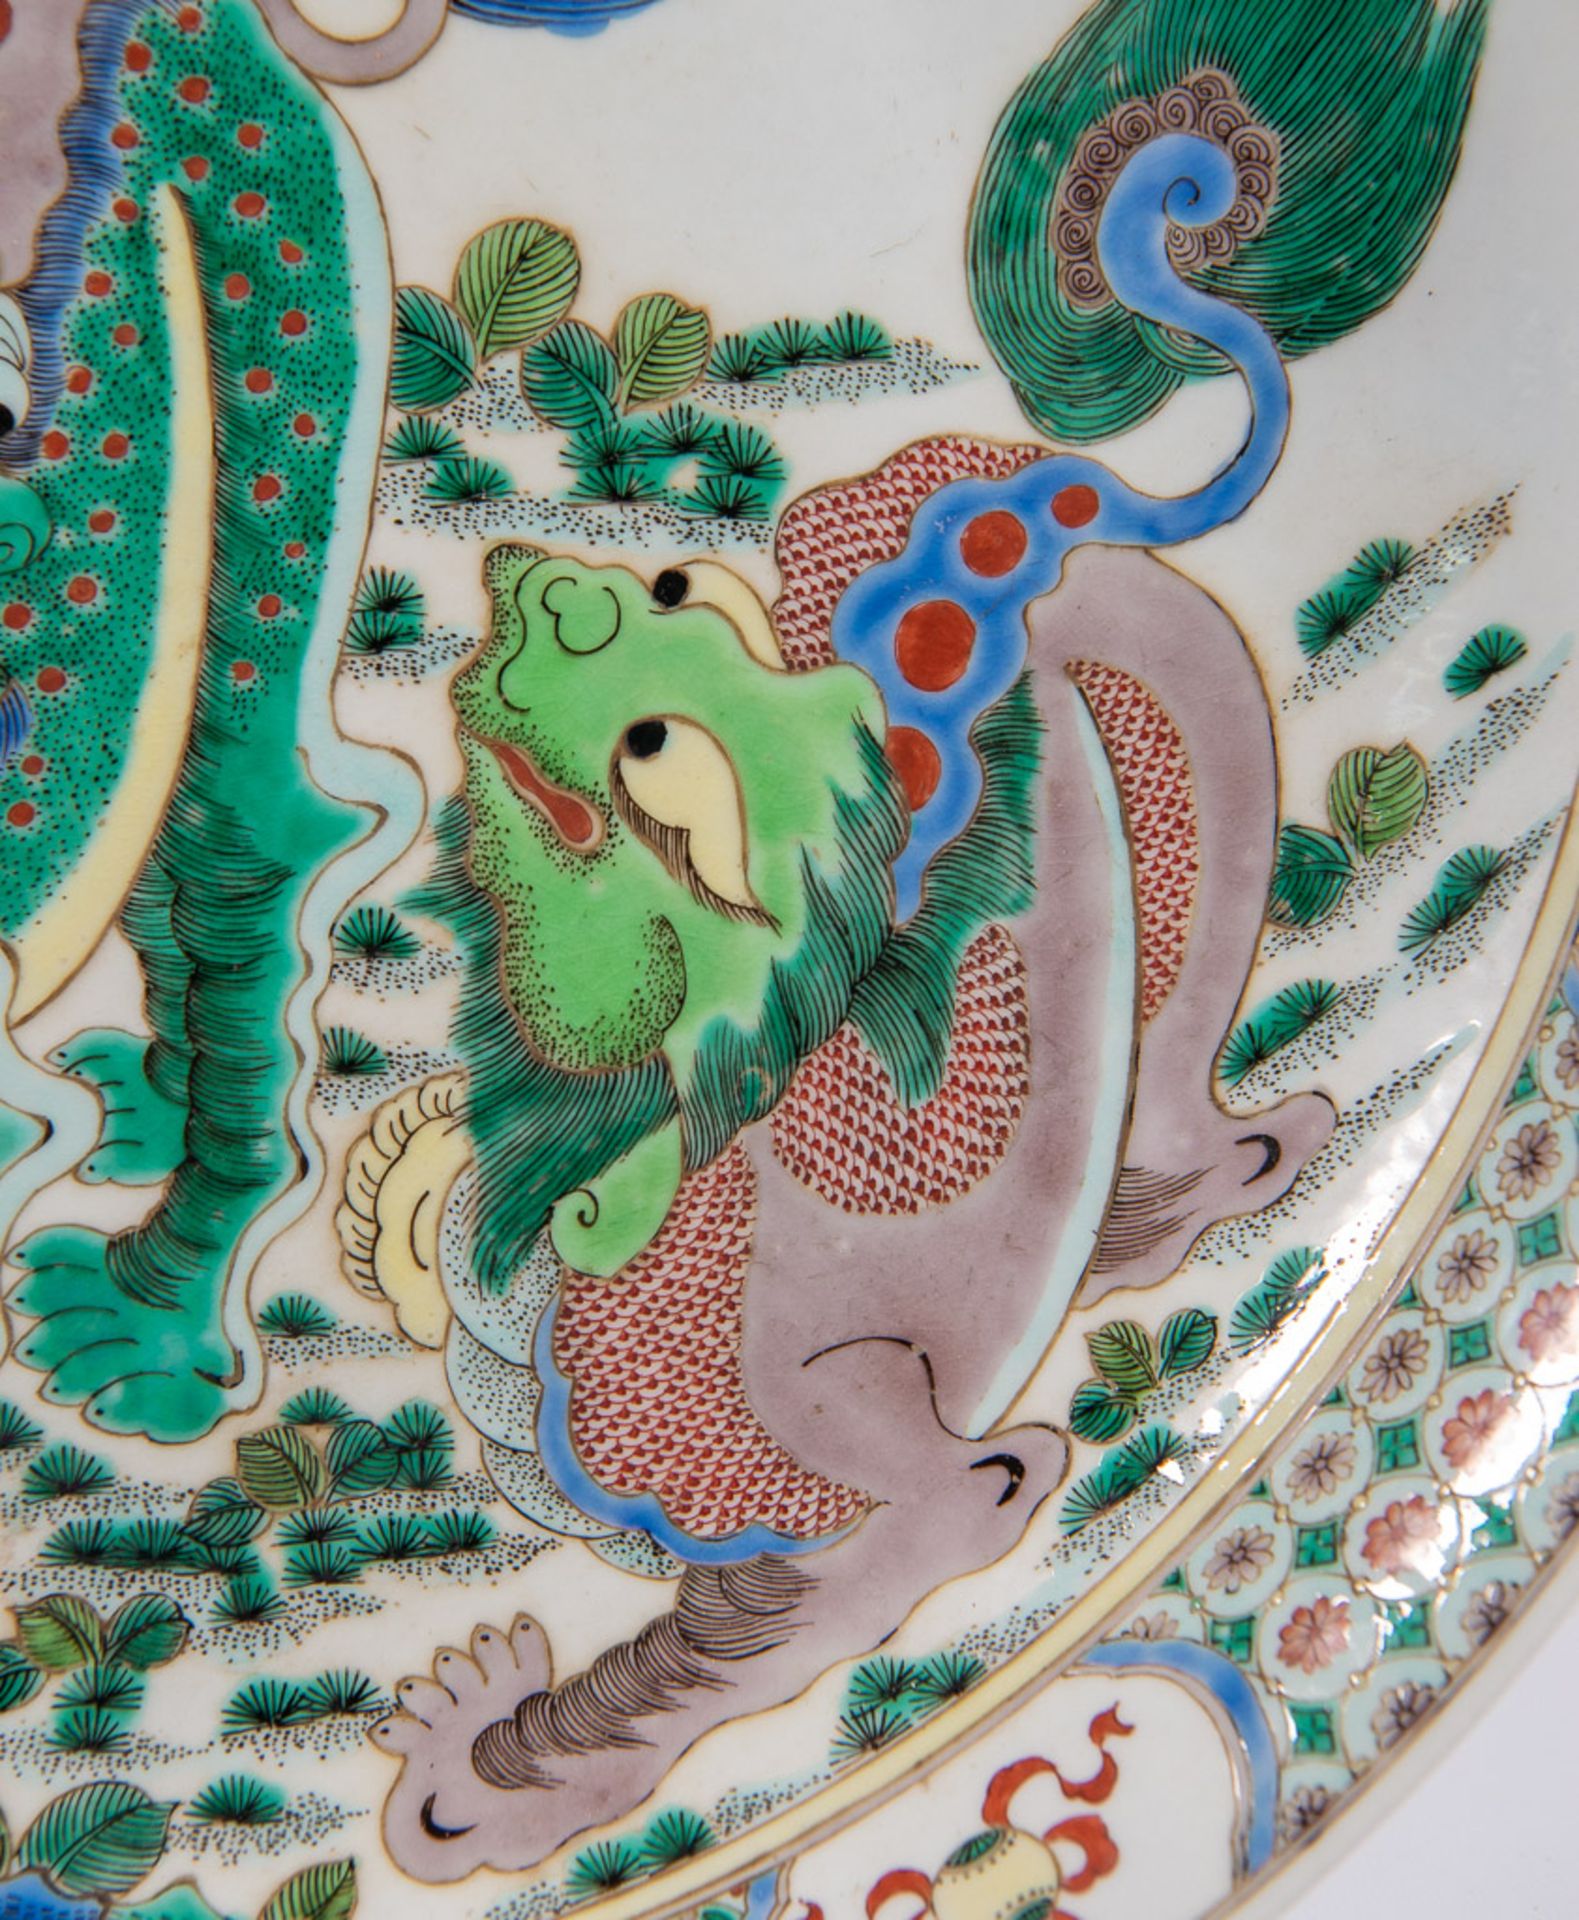 Display plate Wucai with dragons - Image 2 of 12